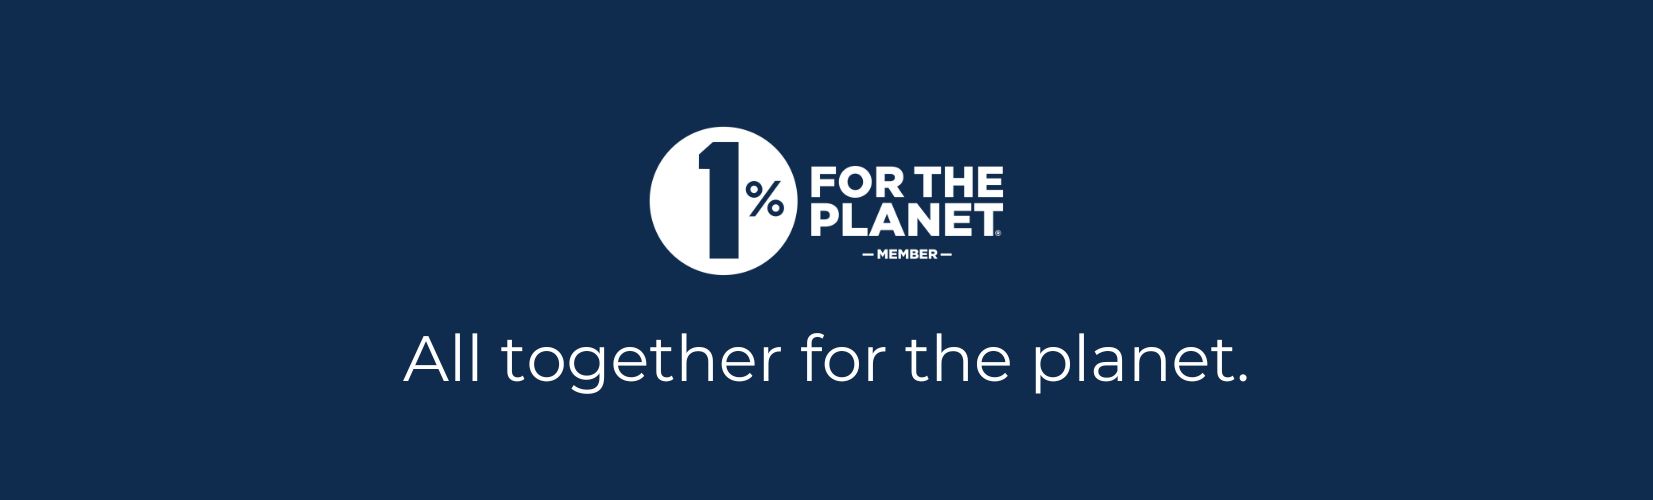 1% for the planet graphic